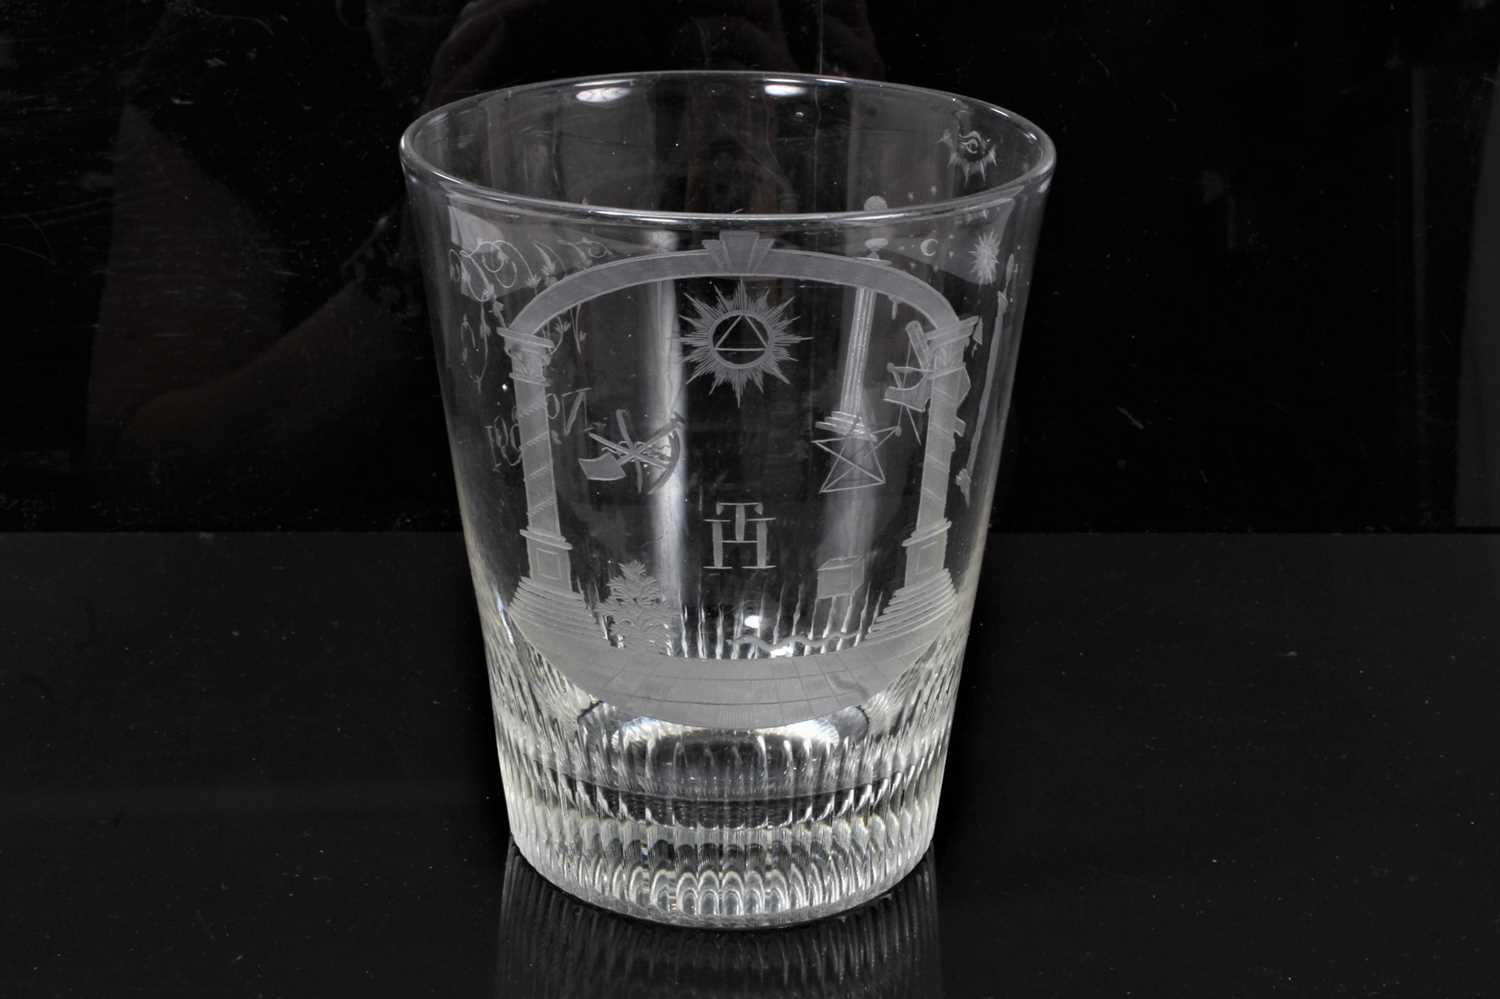 Lot 48 - A large 19th century Scottish Masonic glass tumbler, the tapered cylindrical beaker with engraved Masonic devices and lodge number 391 for Lodge Zetland, The Provincial Grand Lodge of Stirlingshire...